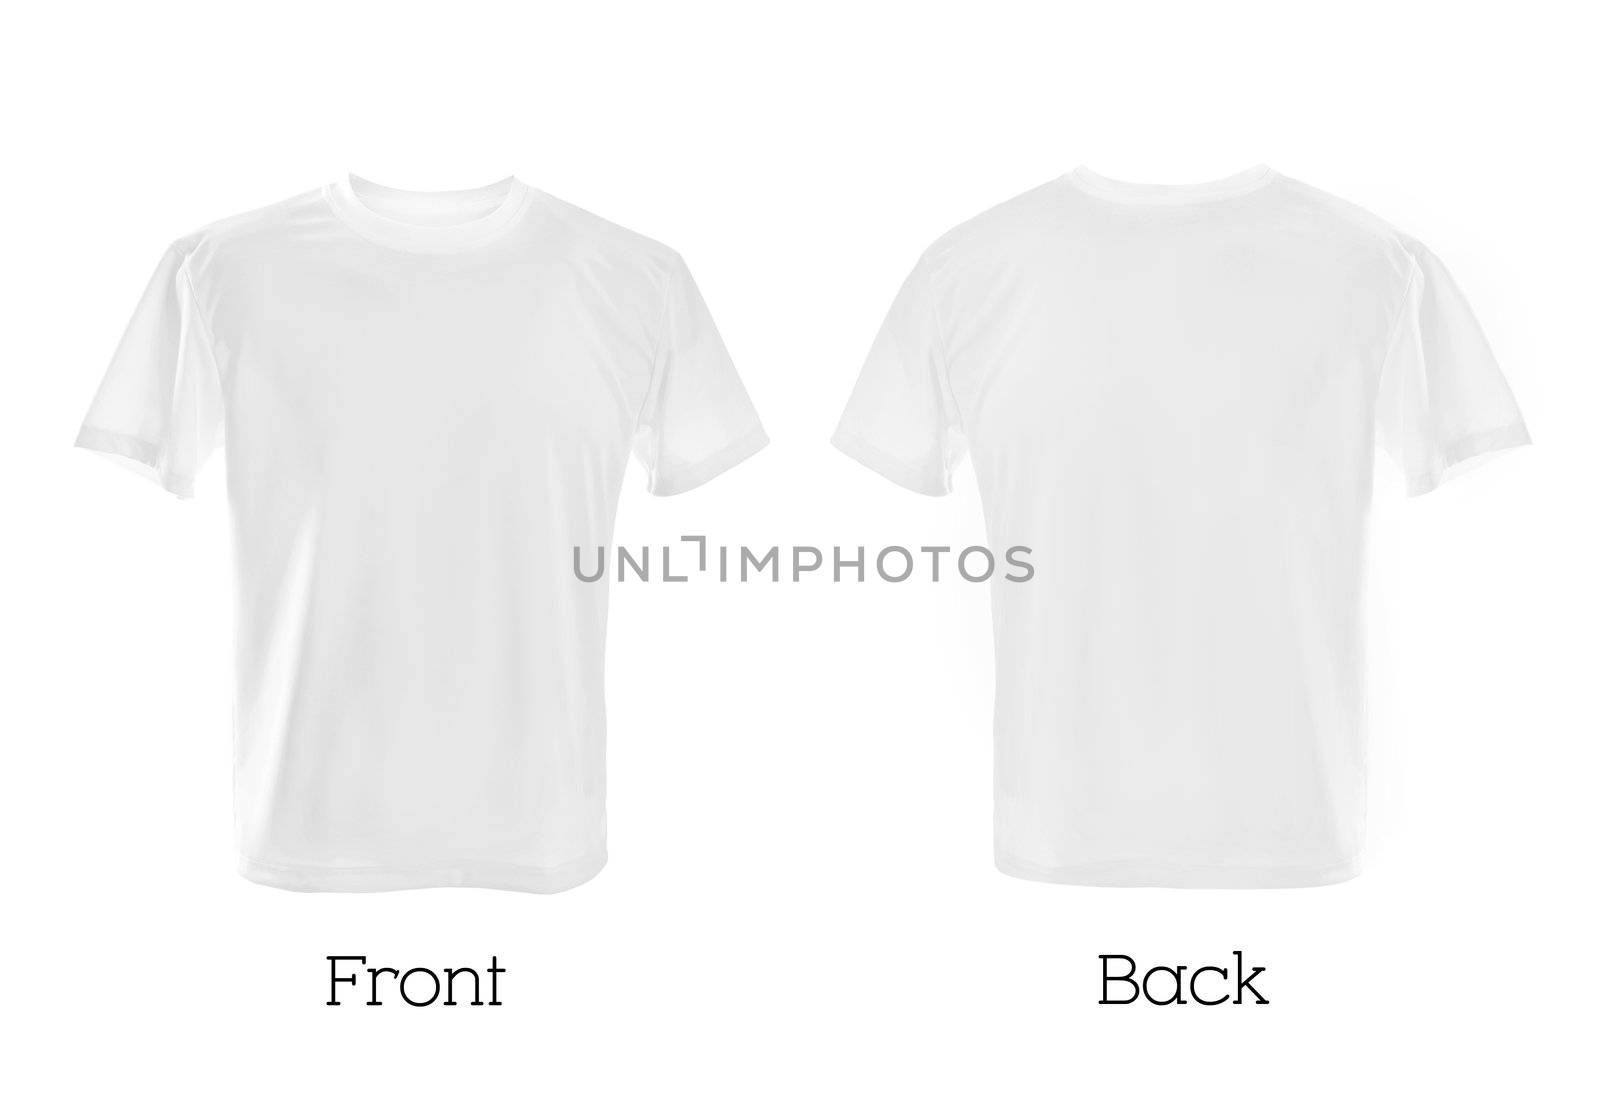 white T-shirts front and back cbe used as design template.